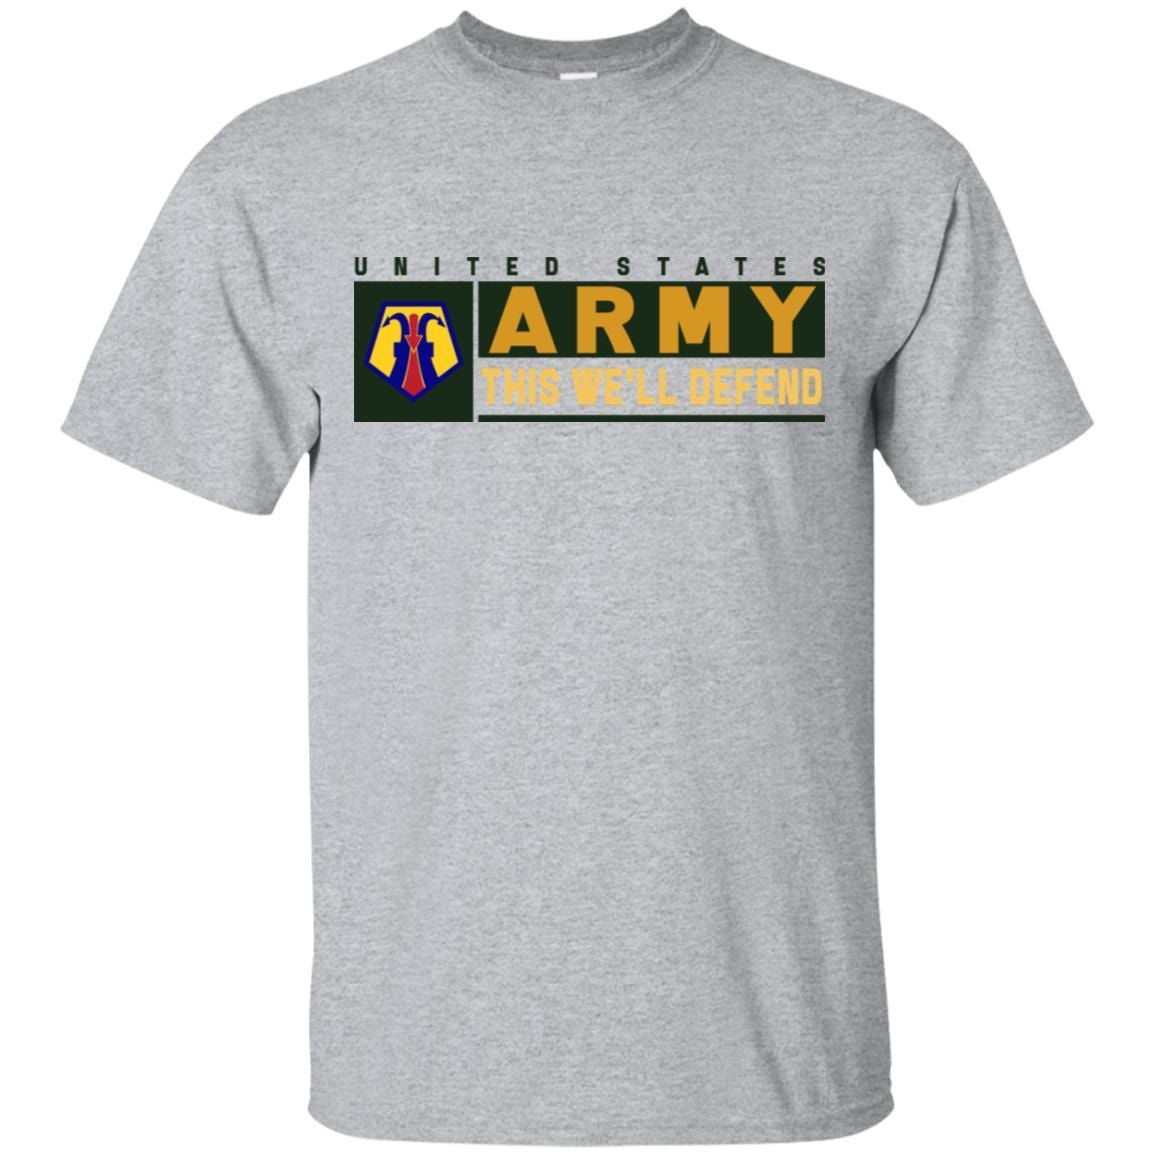 US Army 7TH CIVIL SUPPORT COMMAND- This We'll Defend T-Shirt On Front For Men-TShirt-Army-Veterans Nation